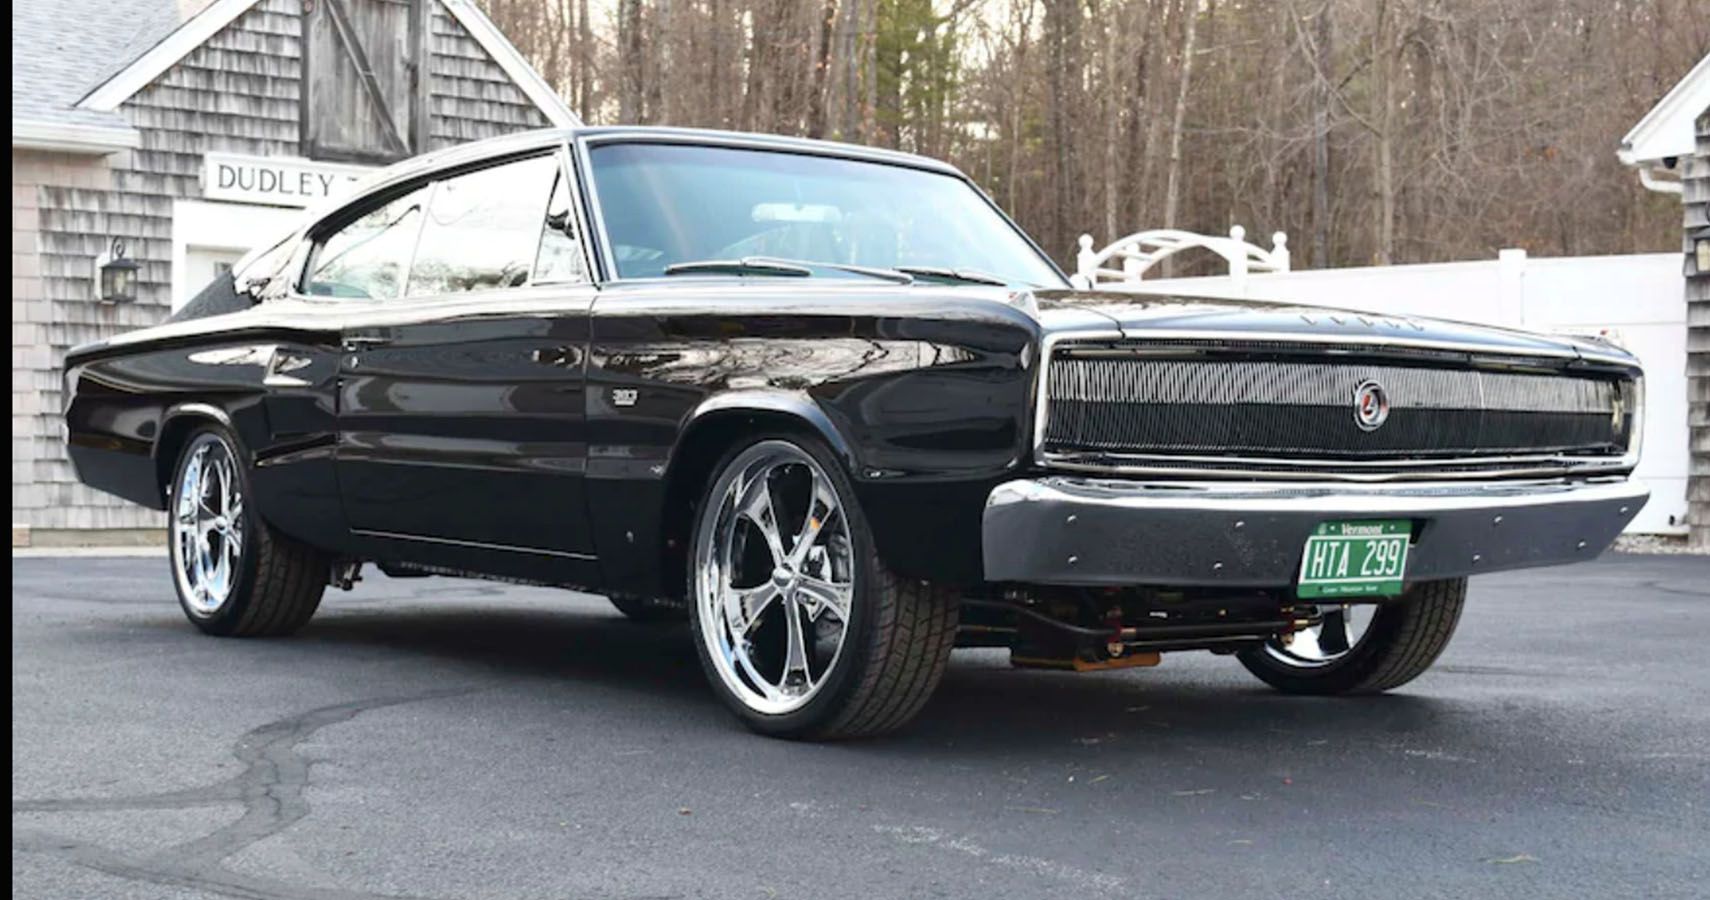 Check Out This Stunning 1967 Dodge Charger Restomod